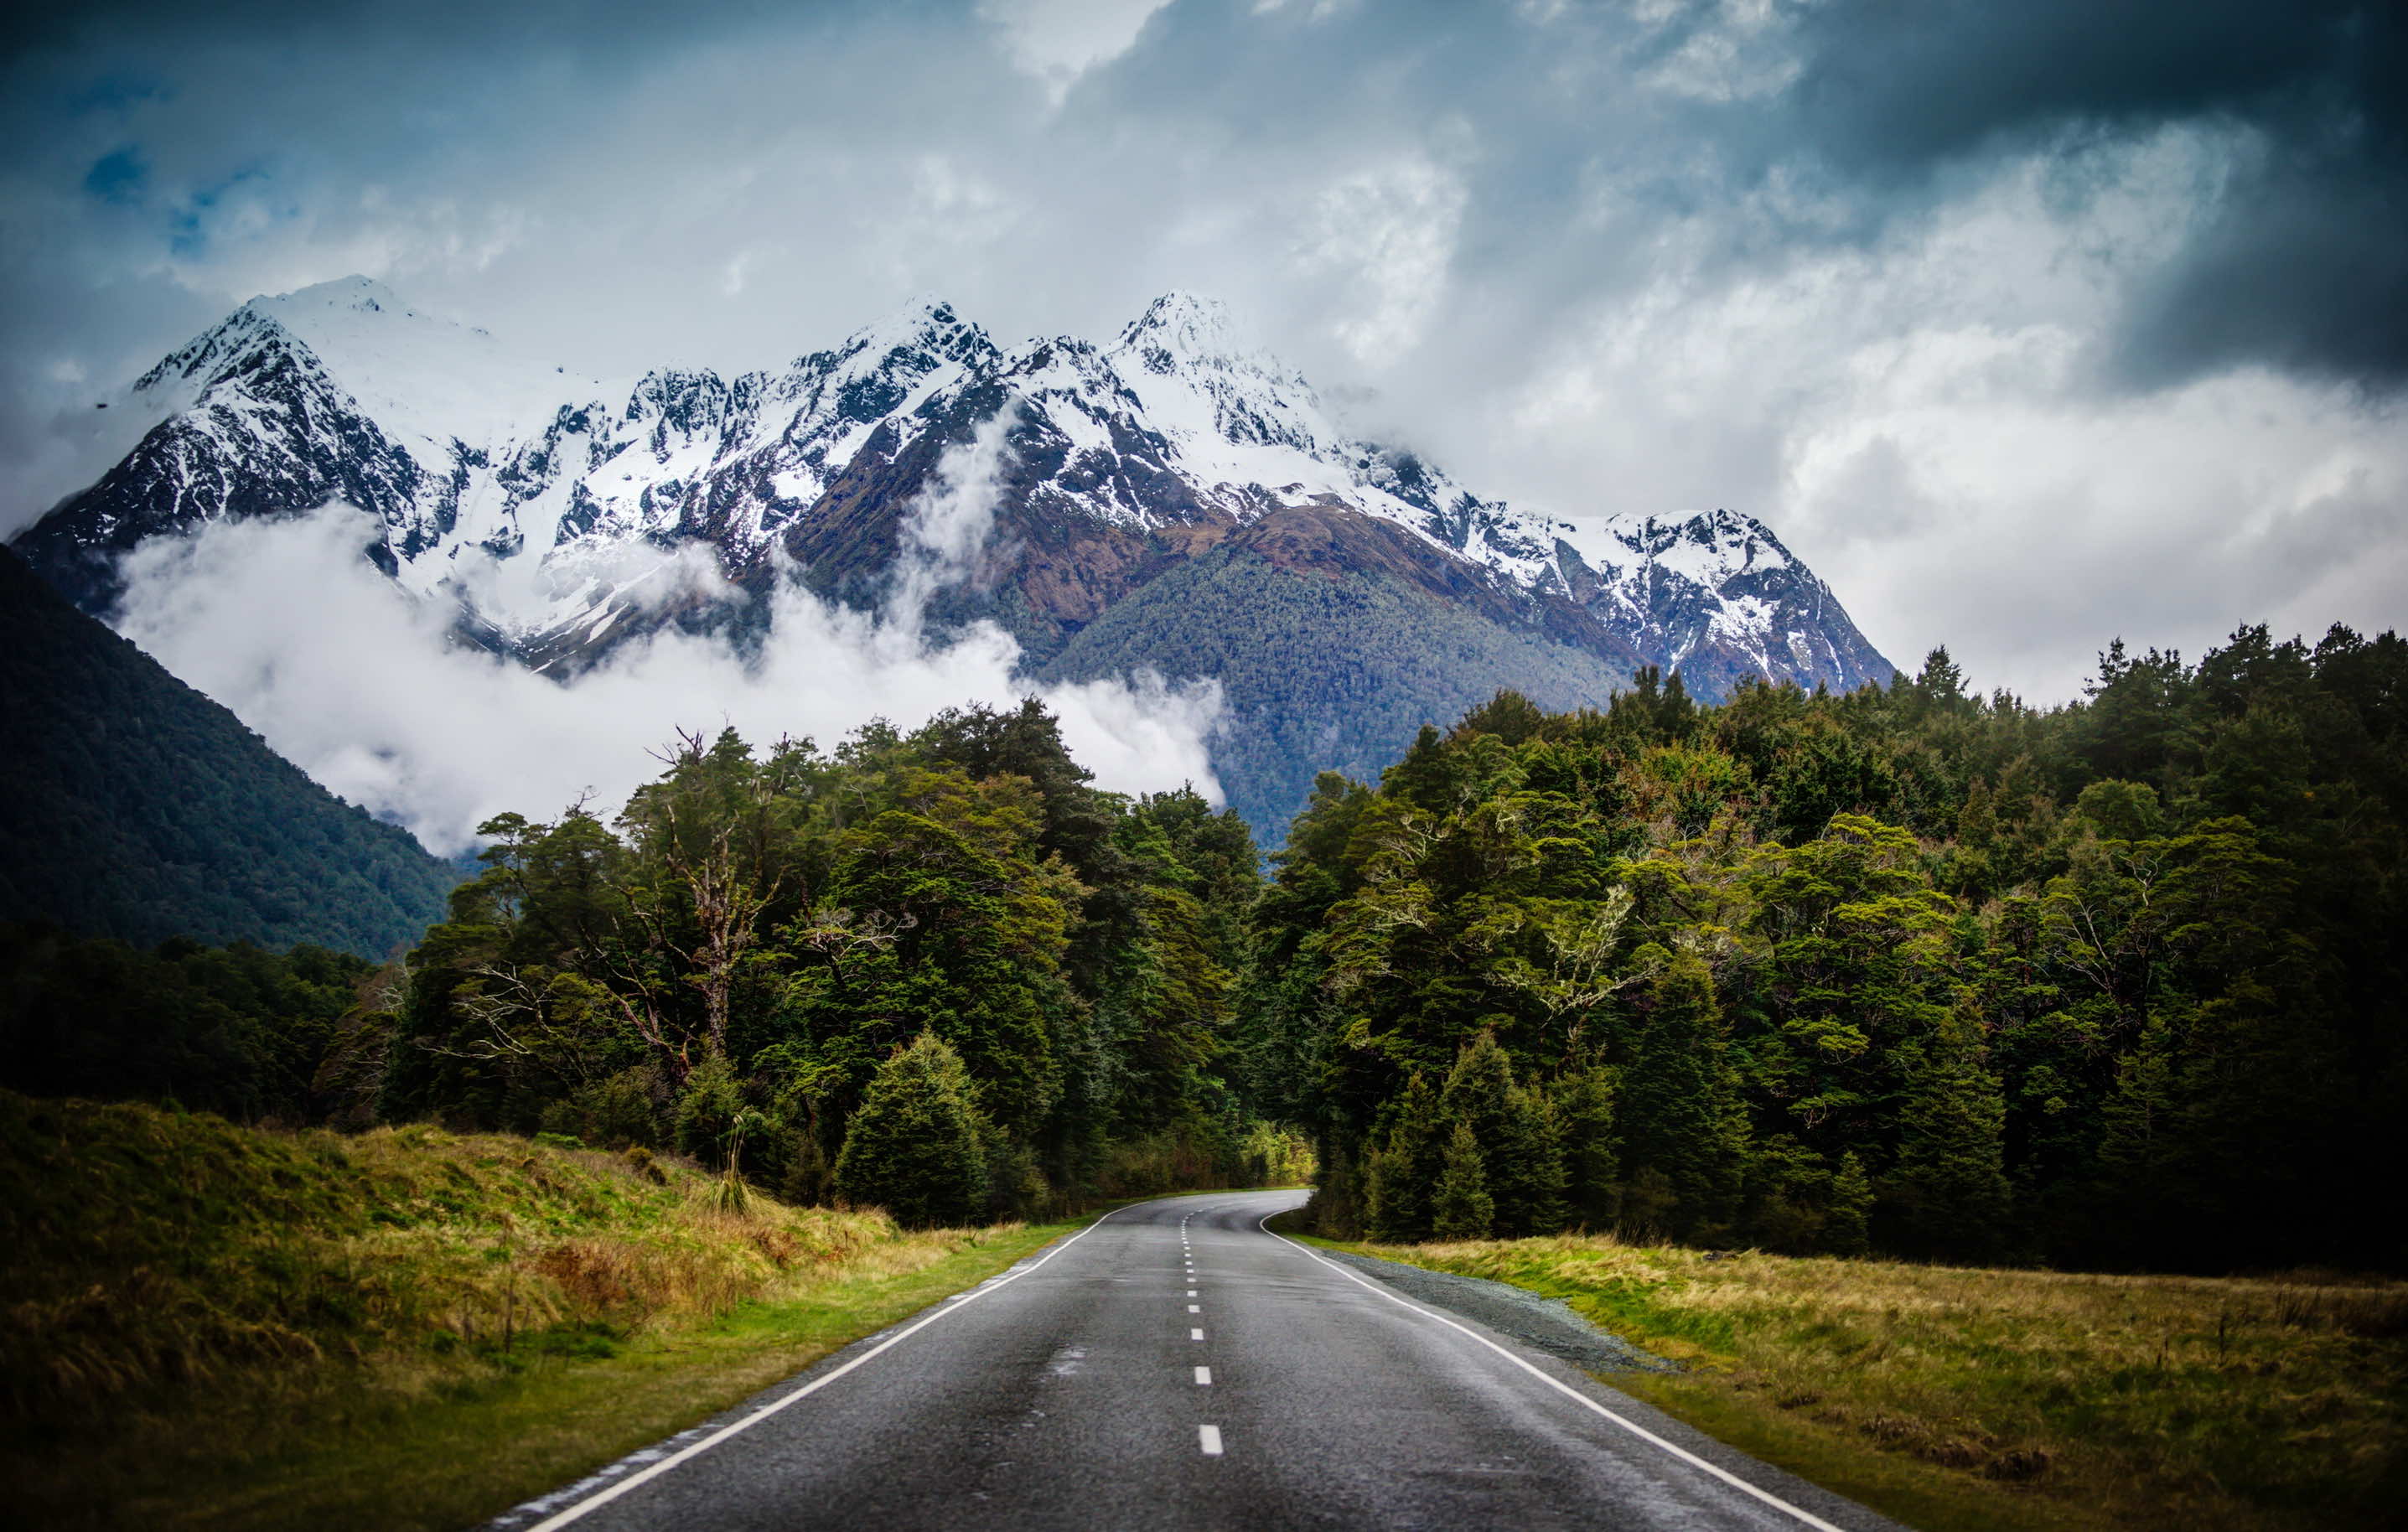 40 Full HD New Zealand Wallpapers For Free Download: The Land of the Mystic